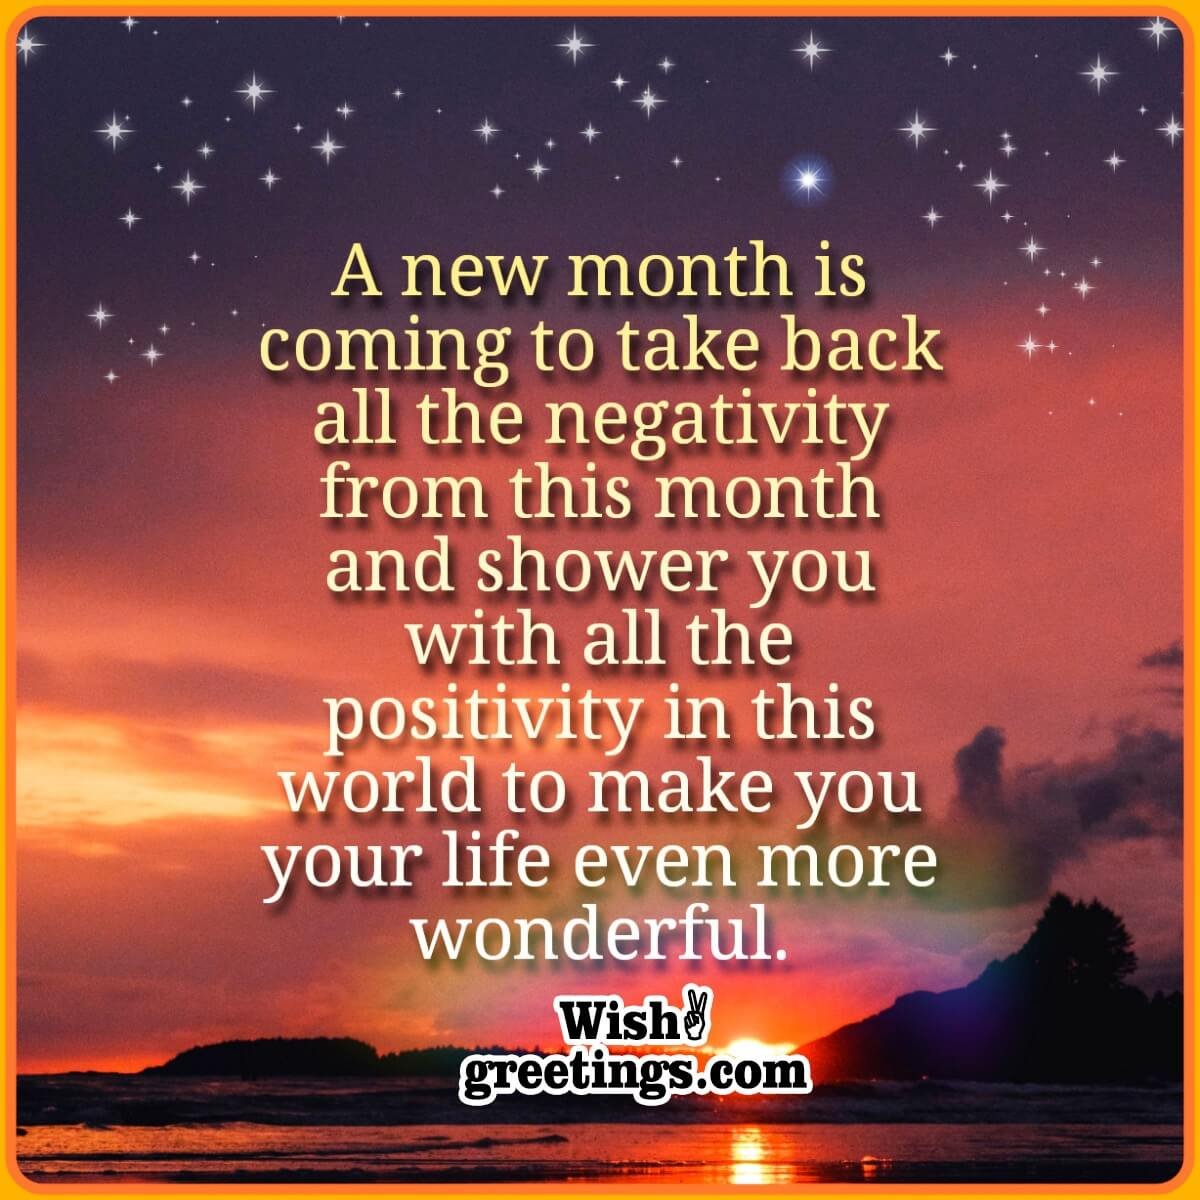 Positive Wish Image For New Month